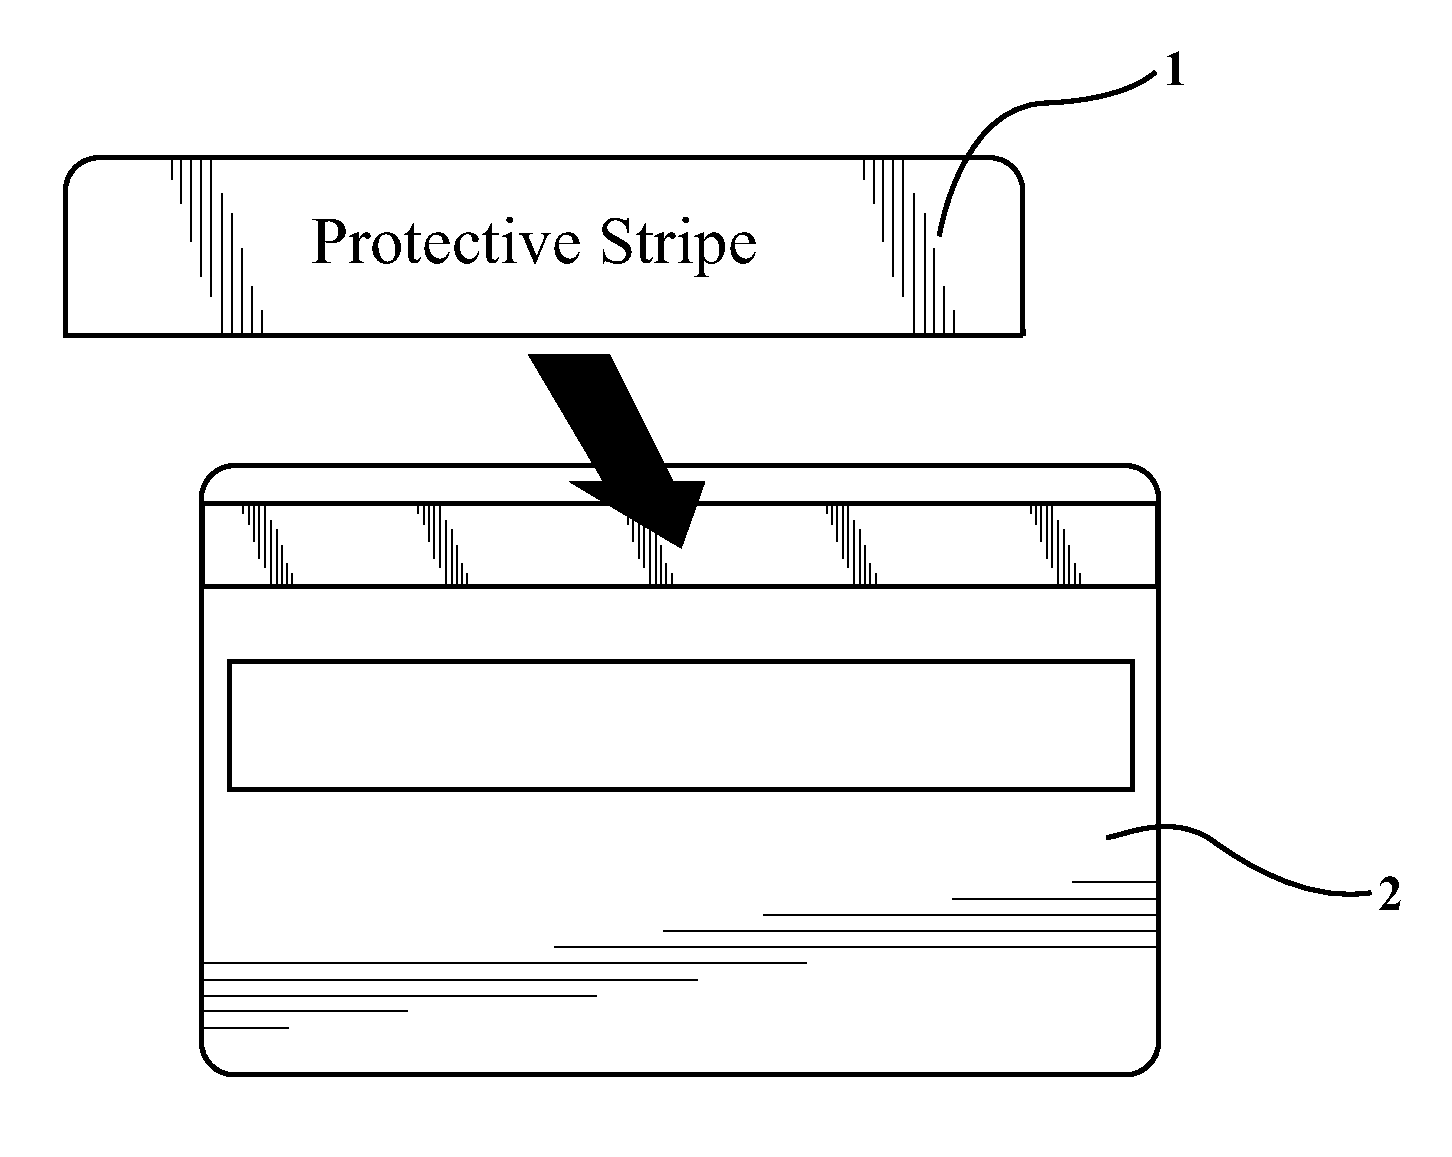 Protective stripe for bank cards